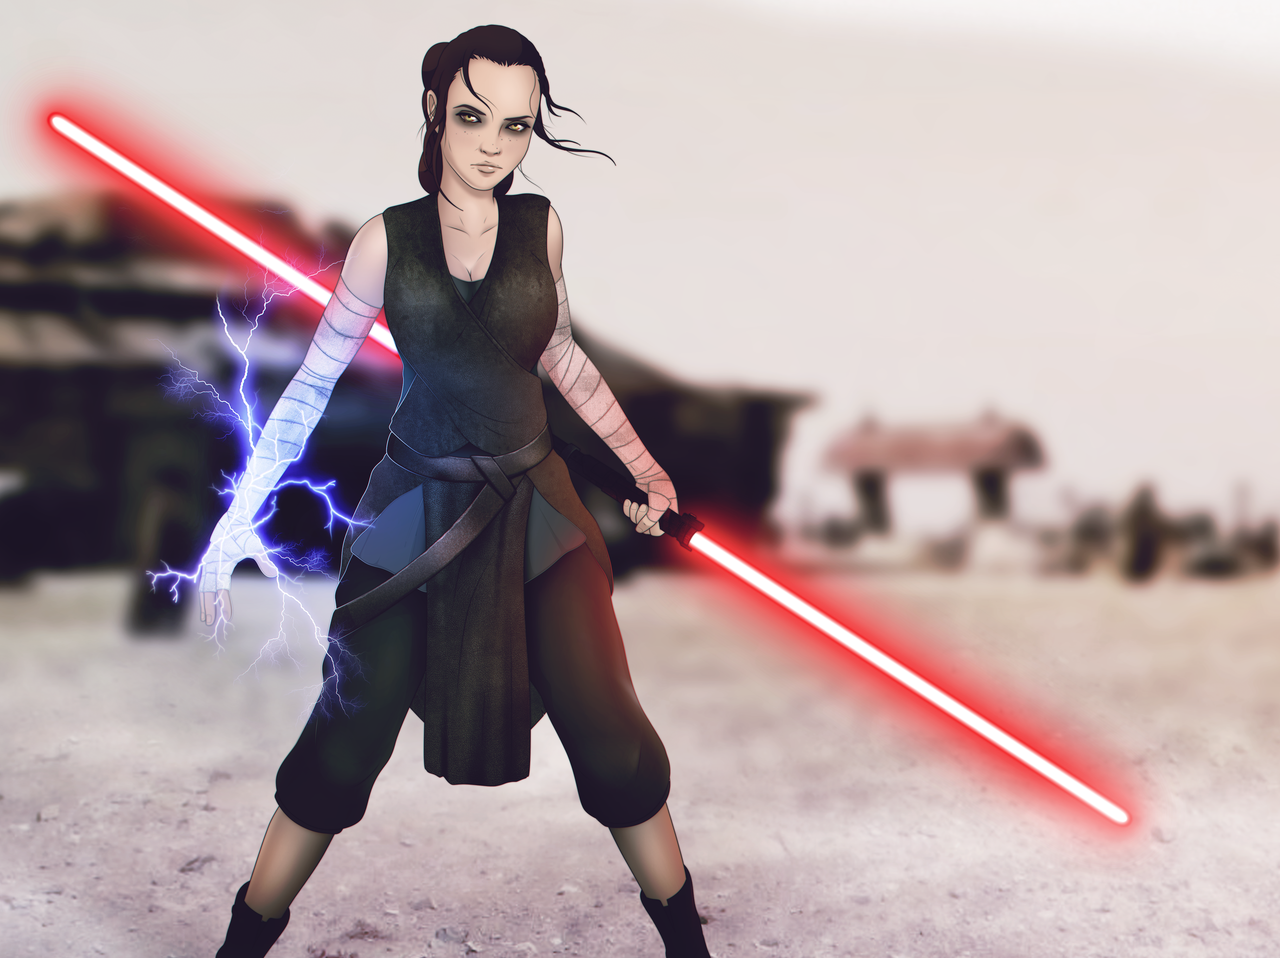 Sith Rey Wallpapers